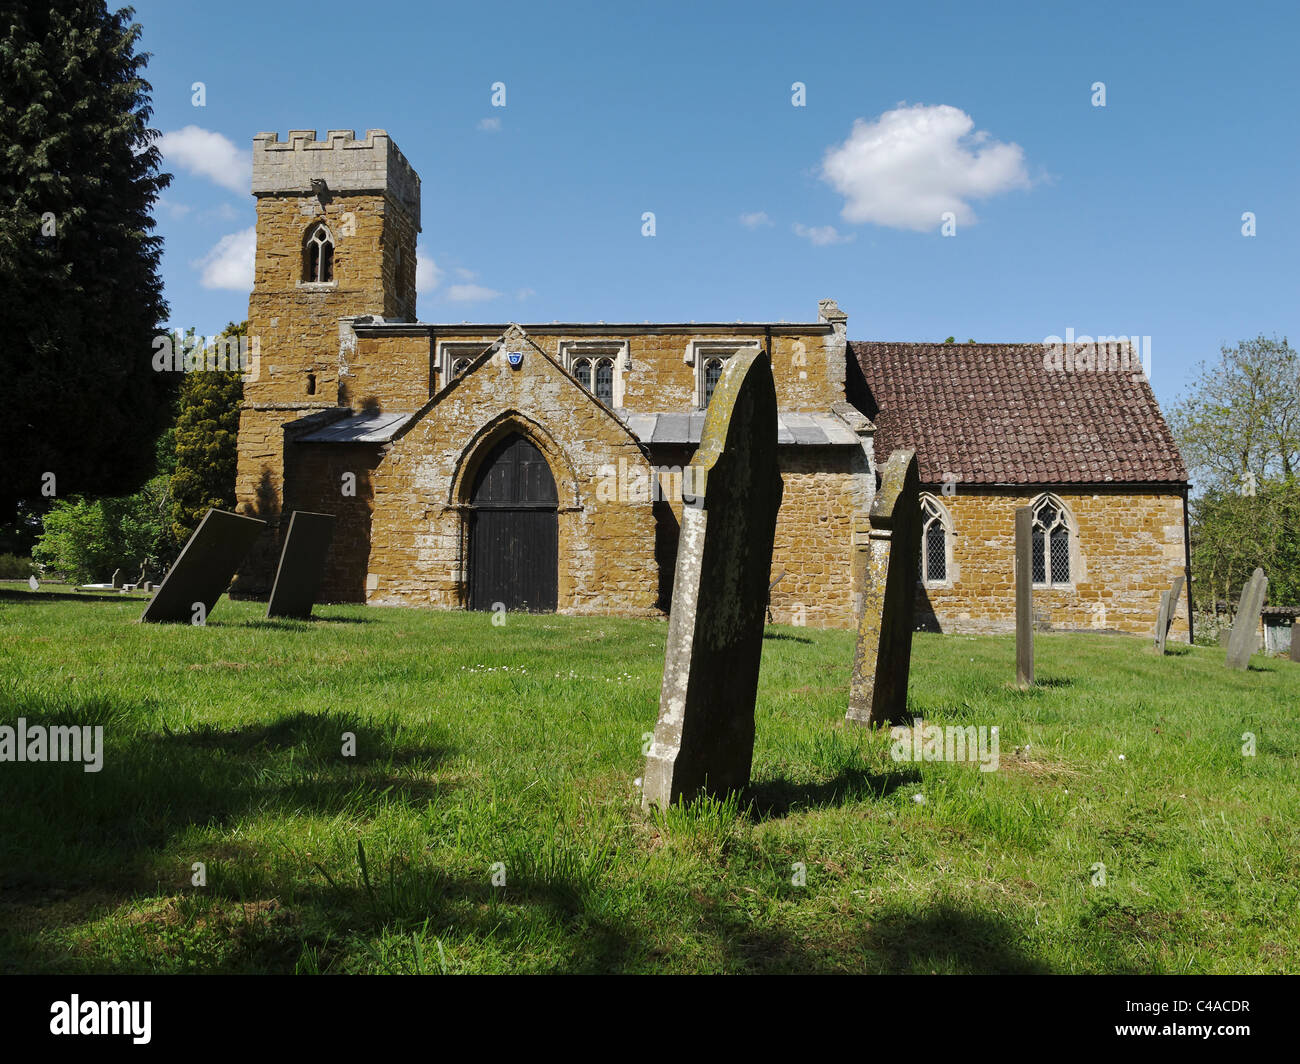 St Michael and All Saints Church, Eastwell, Leicestershire, England. Stock Photo